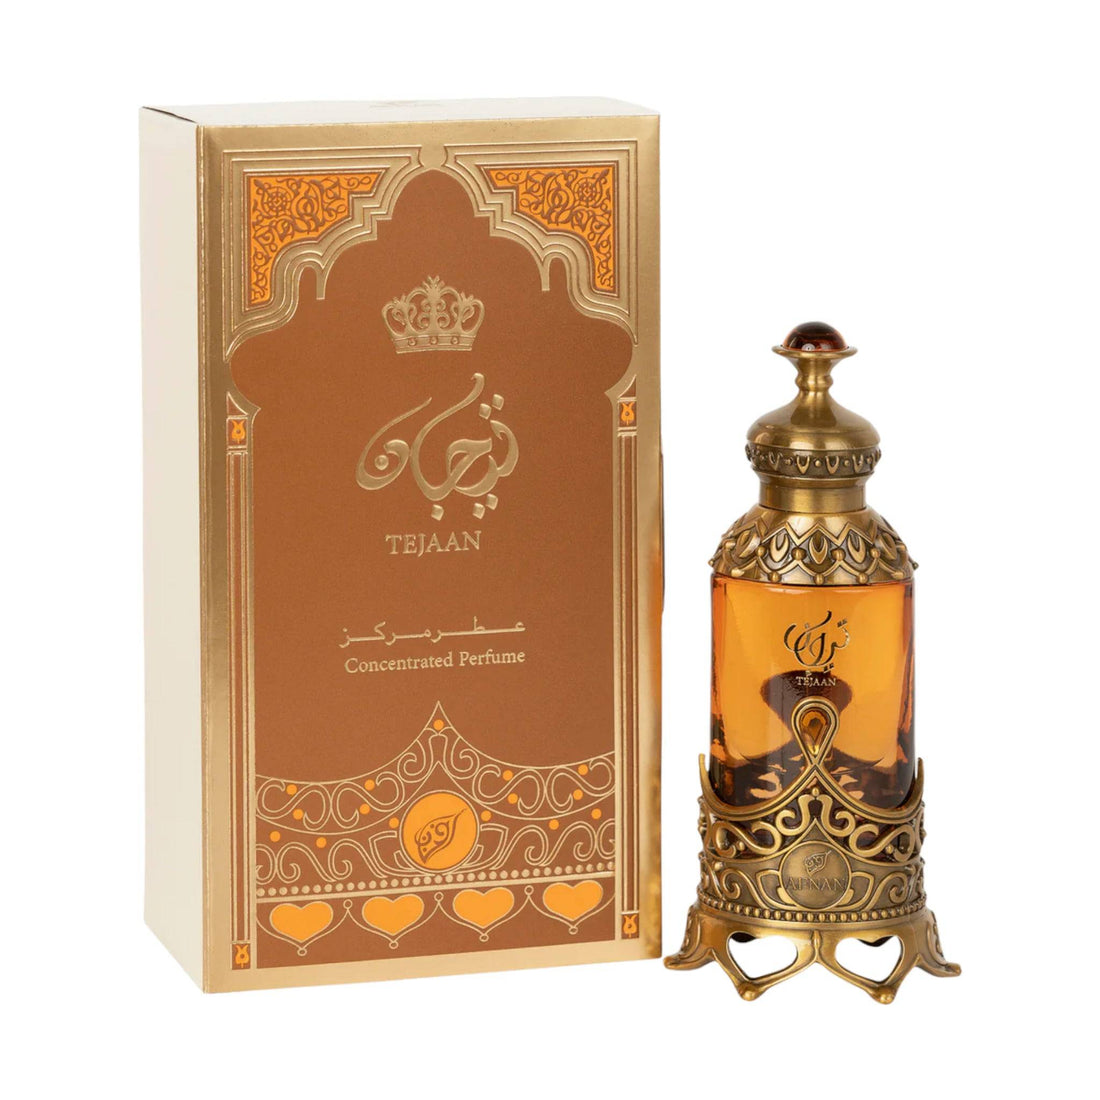 20ml Afnan Tejaan perfume oil bottle featuring captivating notes of citrus, resins, amber, and wood, crafted for prolonged wear and simplicity of application.